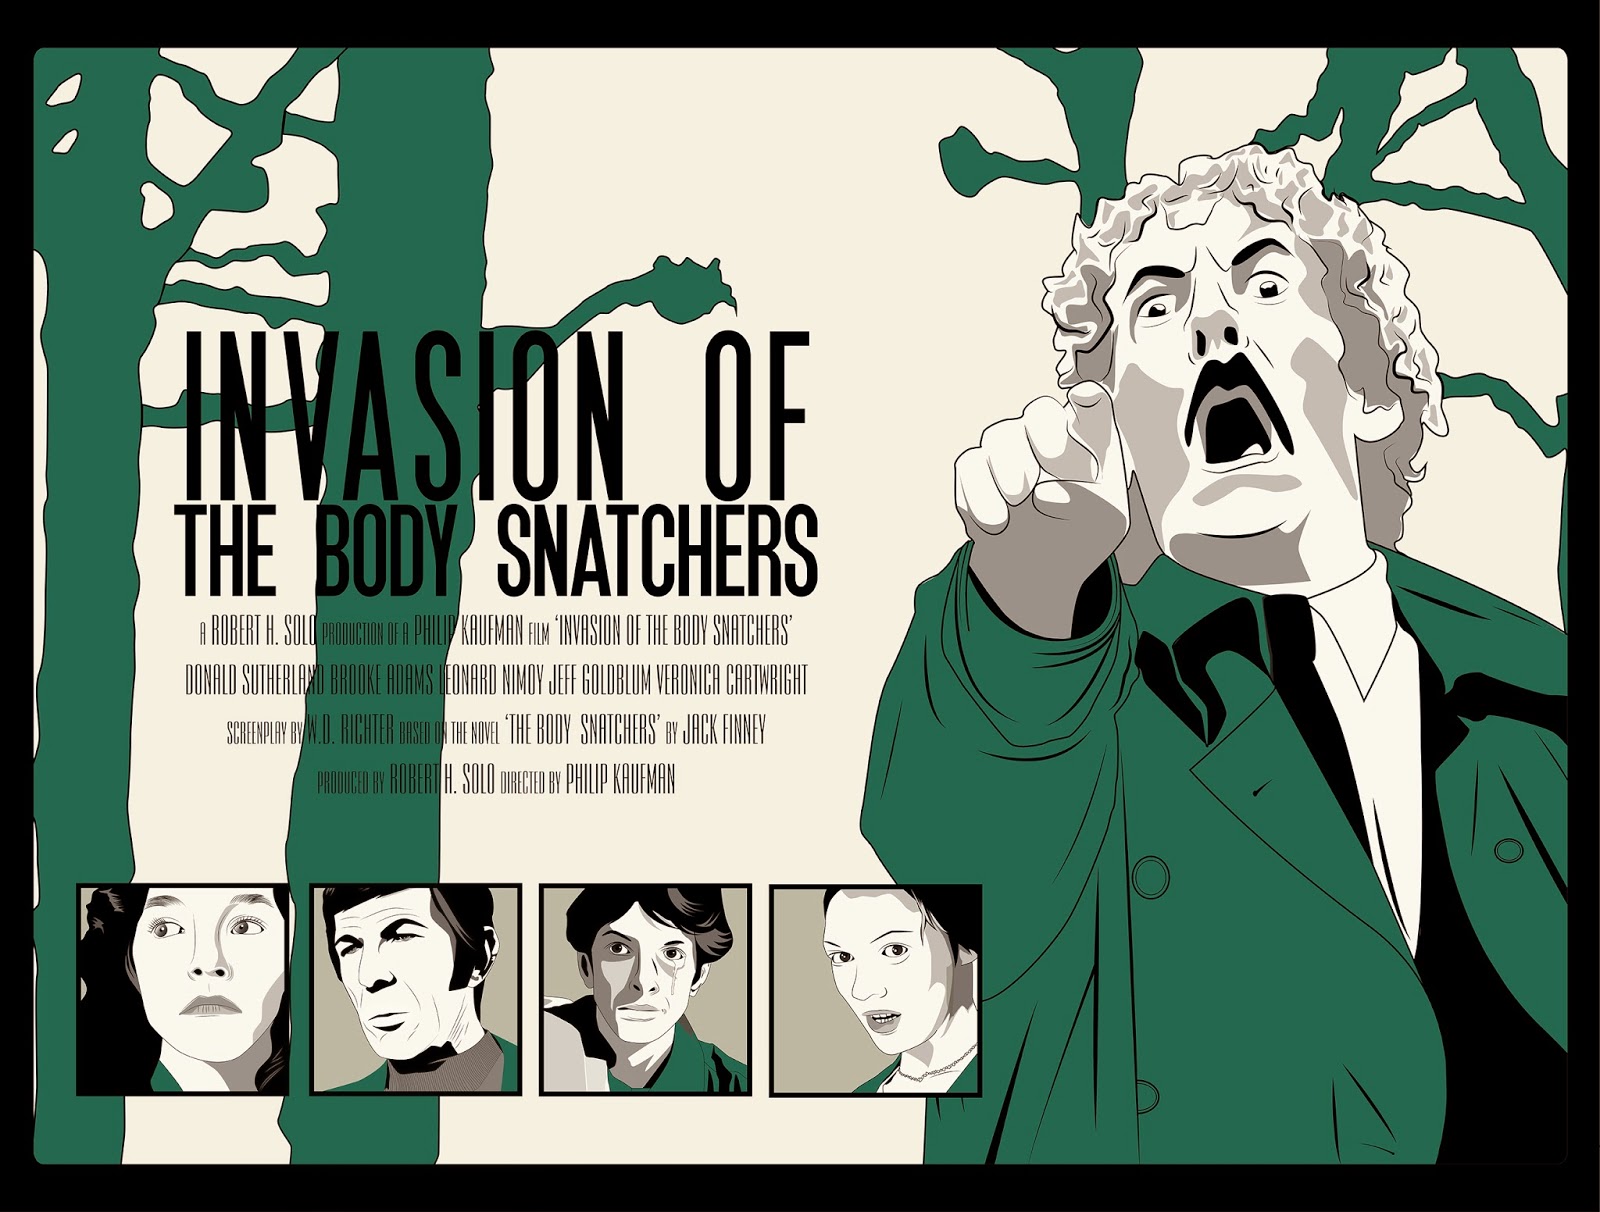  Invasion of the Body Snatchers (1971) BrRip Dual